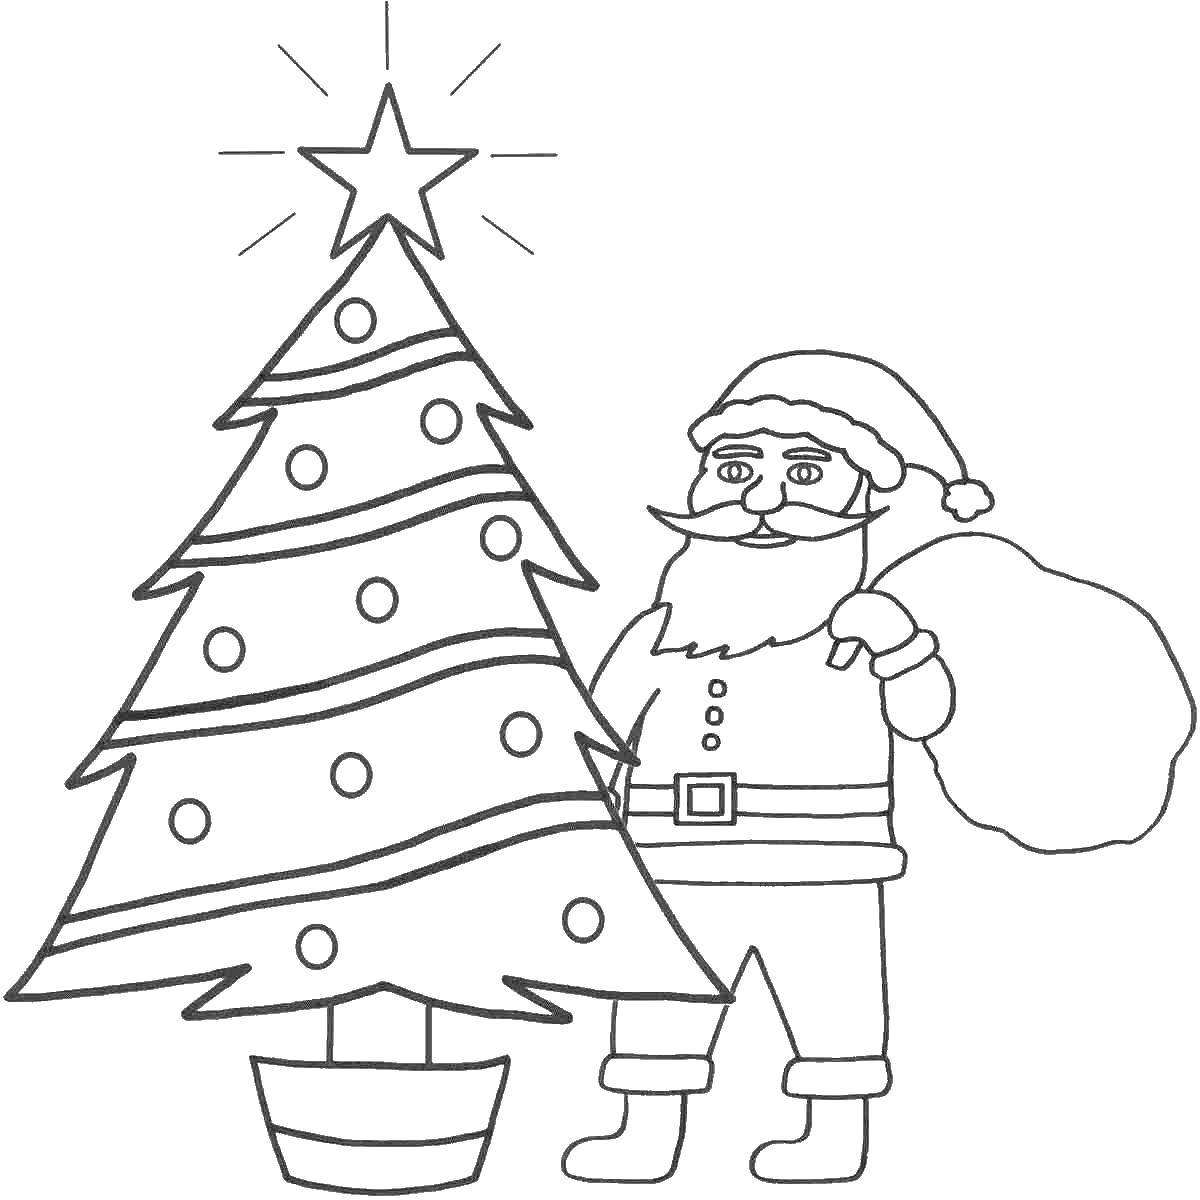 Coloring Santa Claus with Christmas tree. Category Christmas. Tags:  Christmas, tree, Santa.